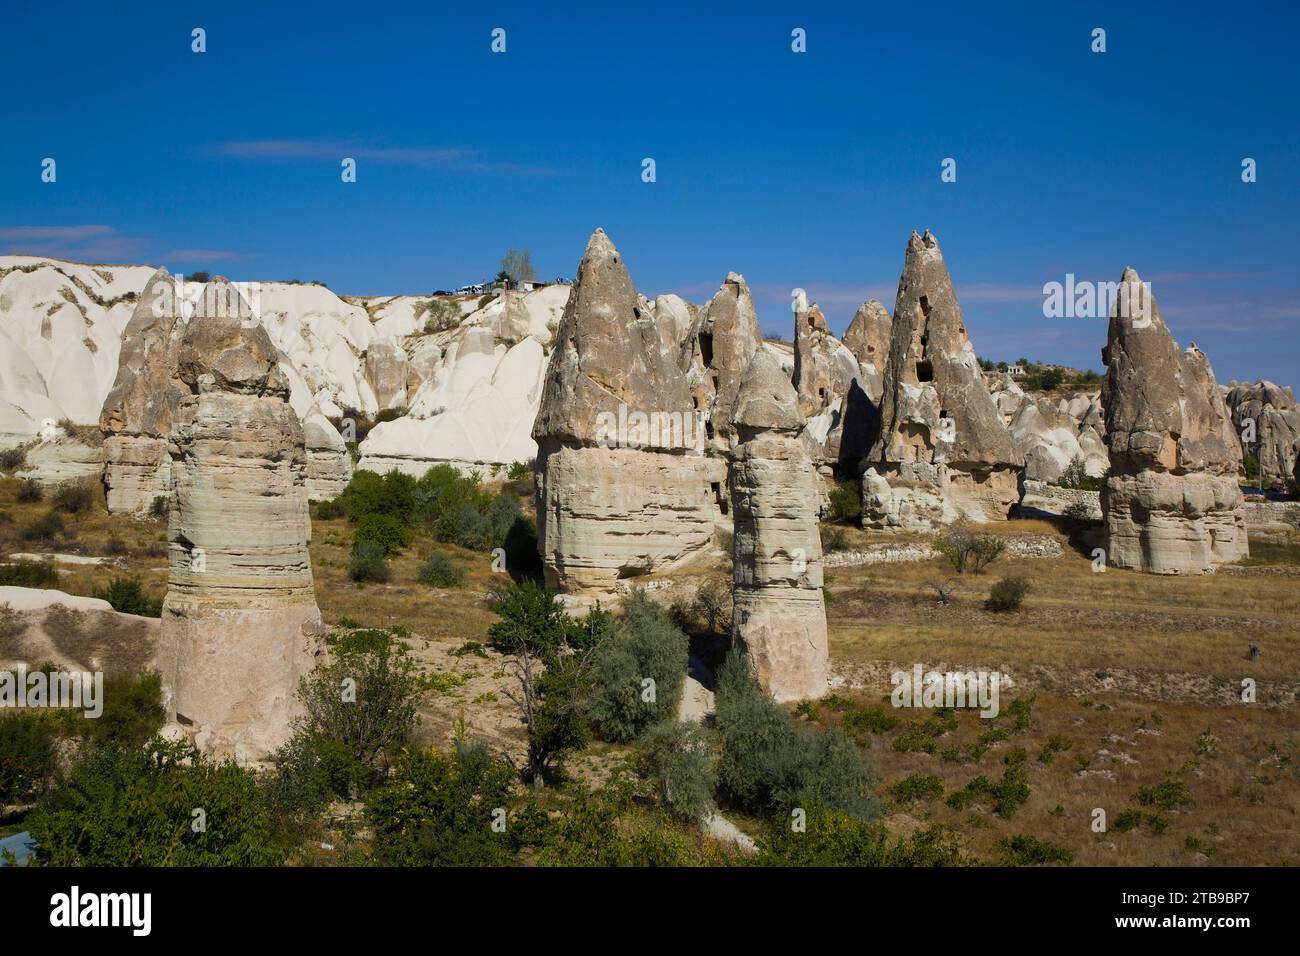 Cave Houses carved into the volcanic rock formations, Fairy Chimneys, against a bright blue sky near the Town of Goreme in Pigeon Valley, Cappadoci... Stock Photo